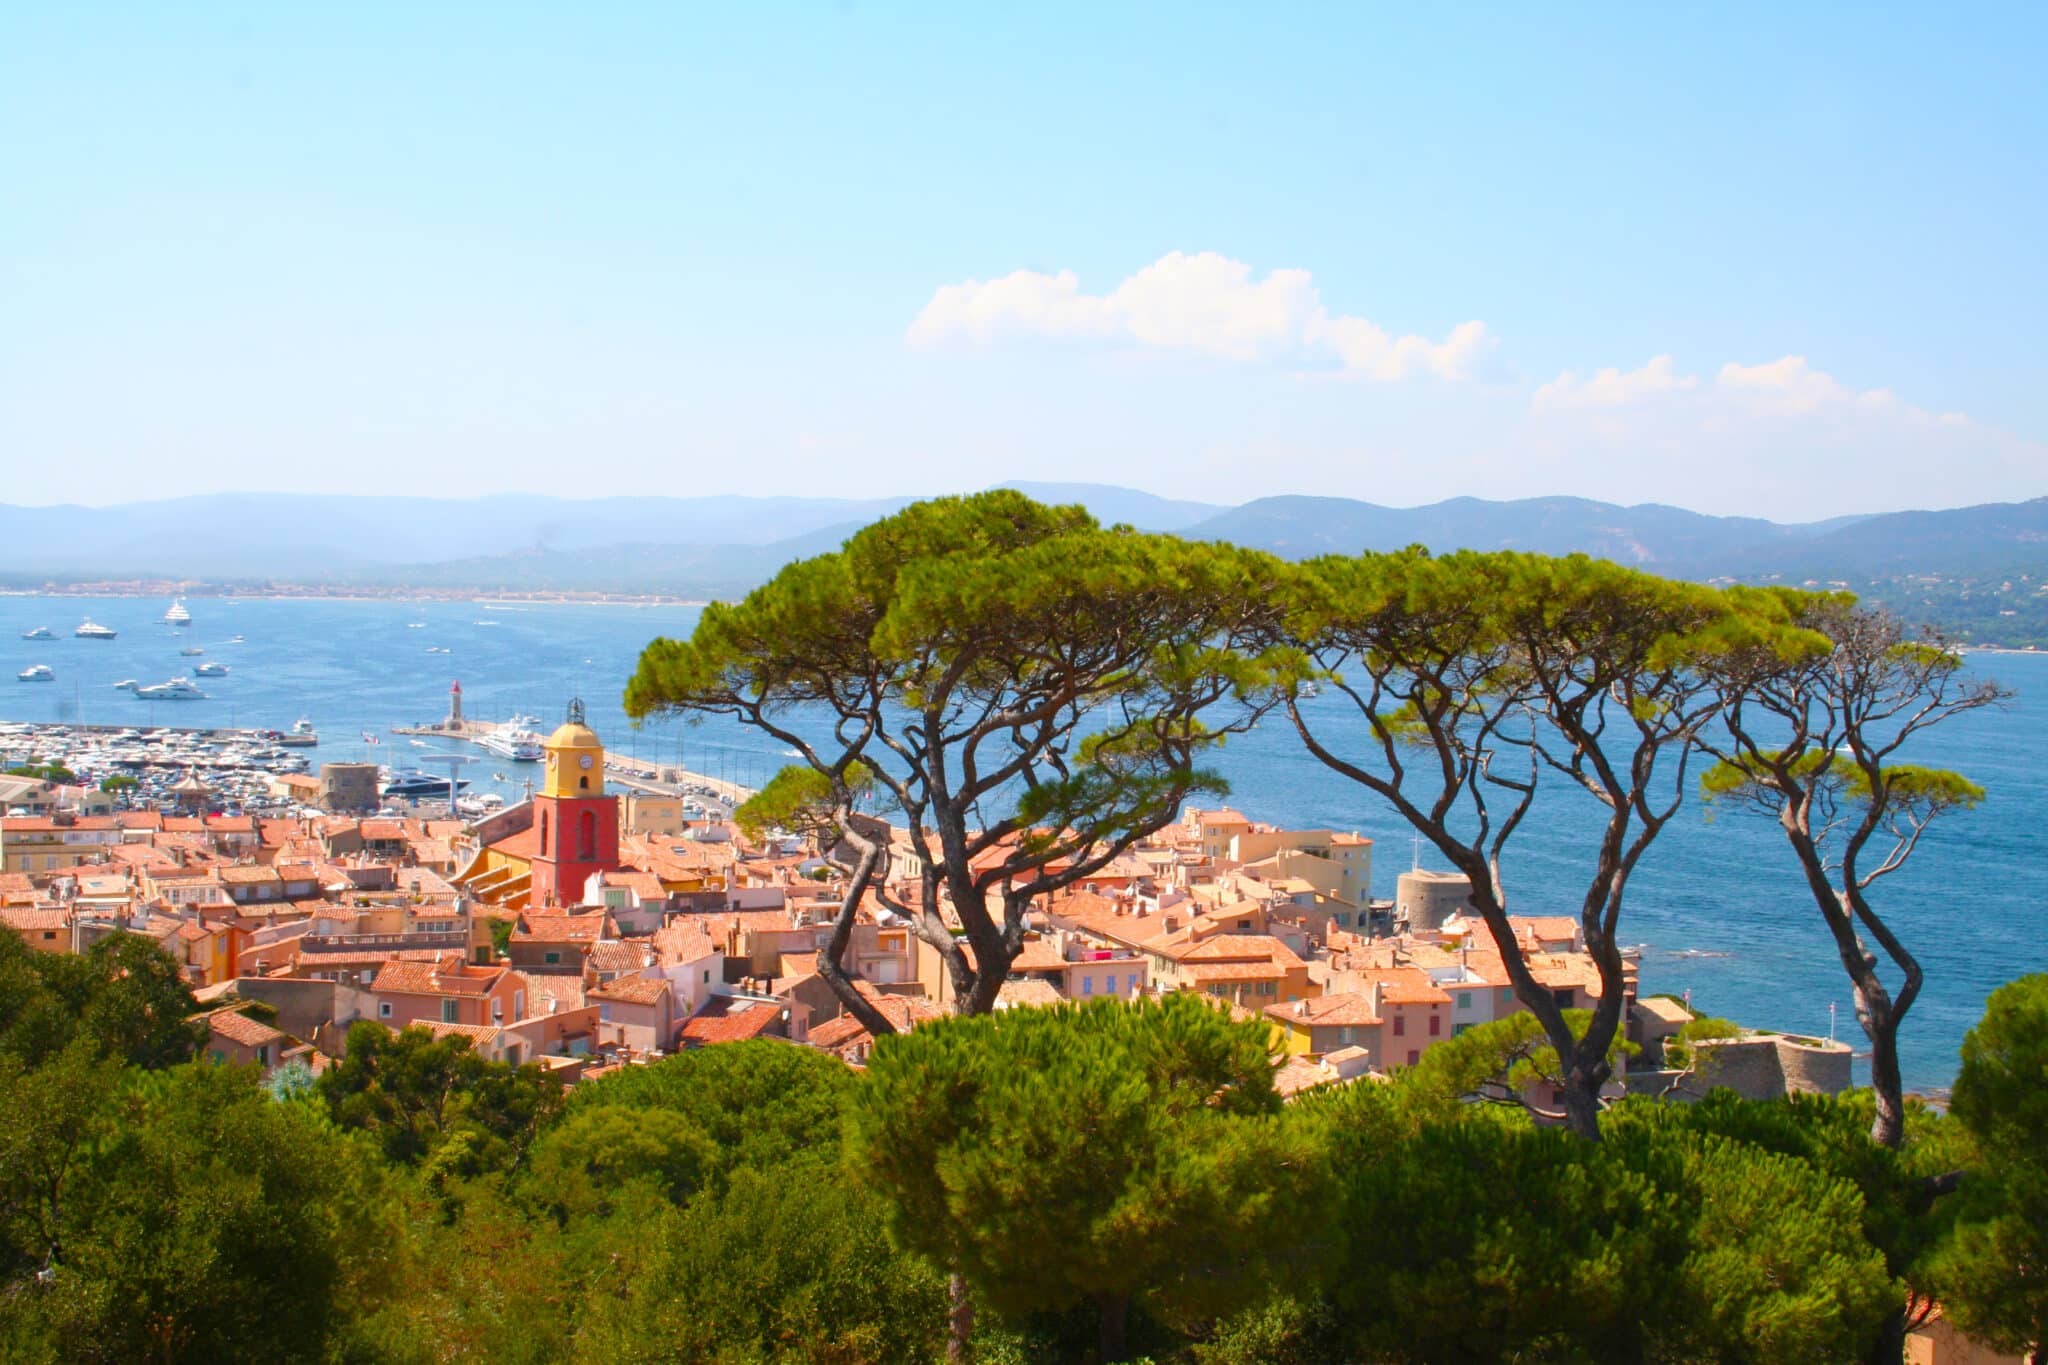 View over Saint-Tropez, on the French Riviera